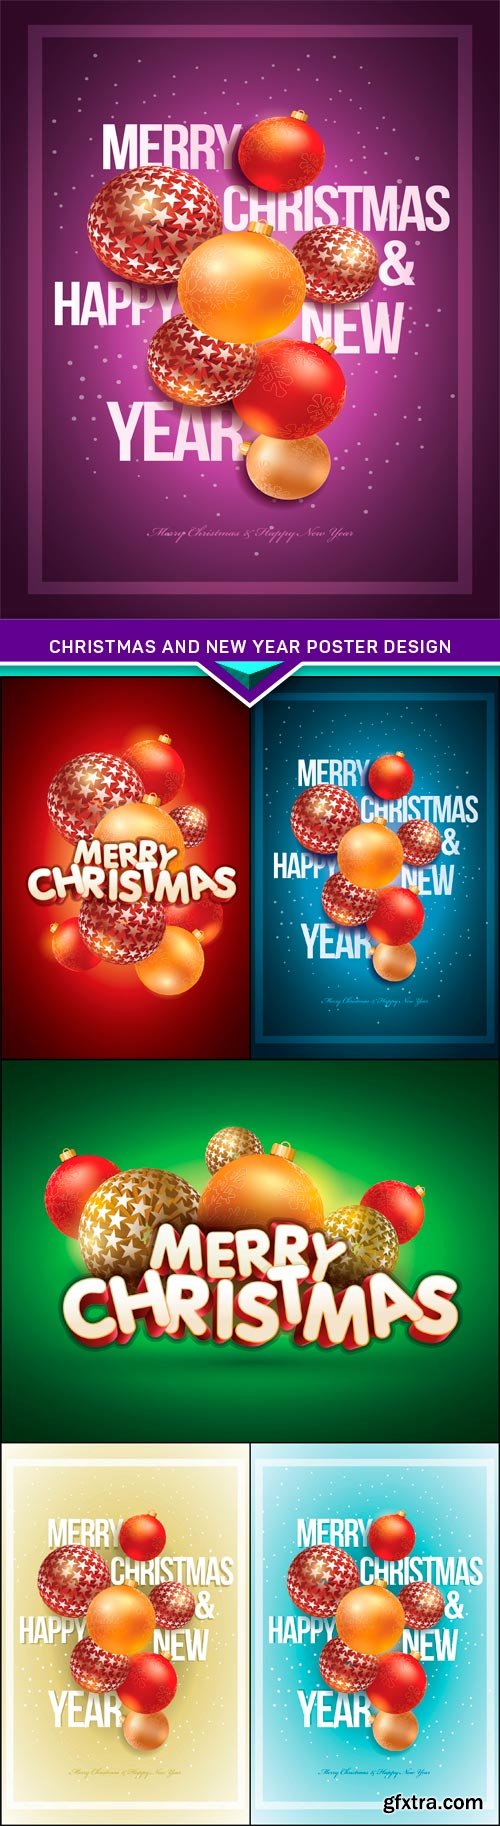 Christmas and New Year Poster Design 6X EPS